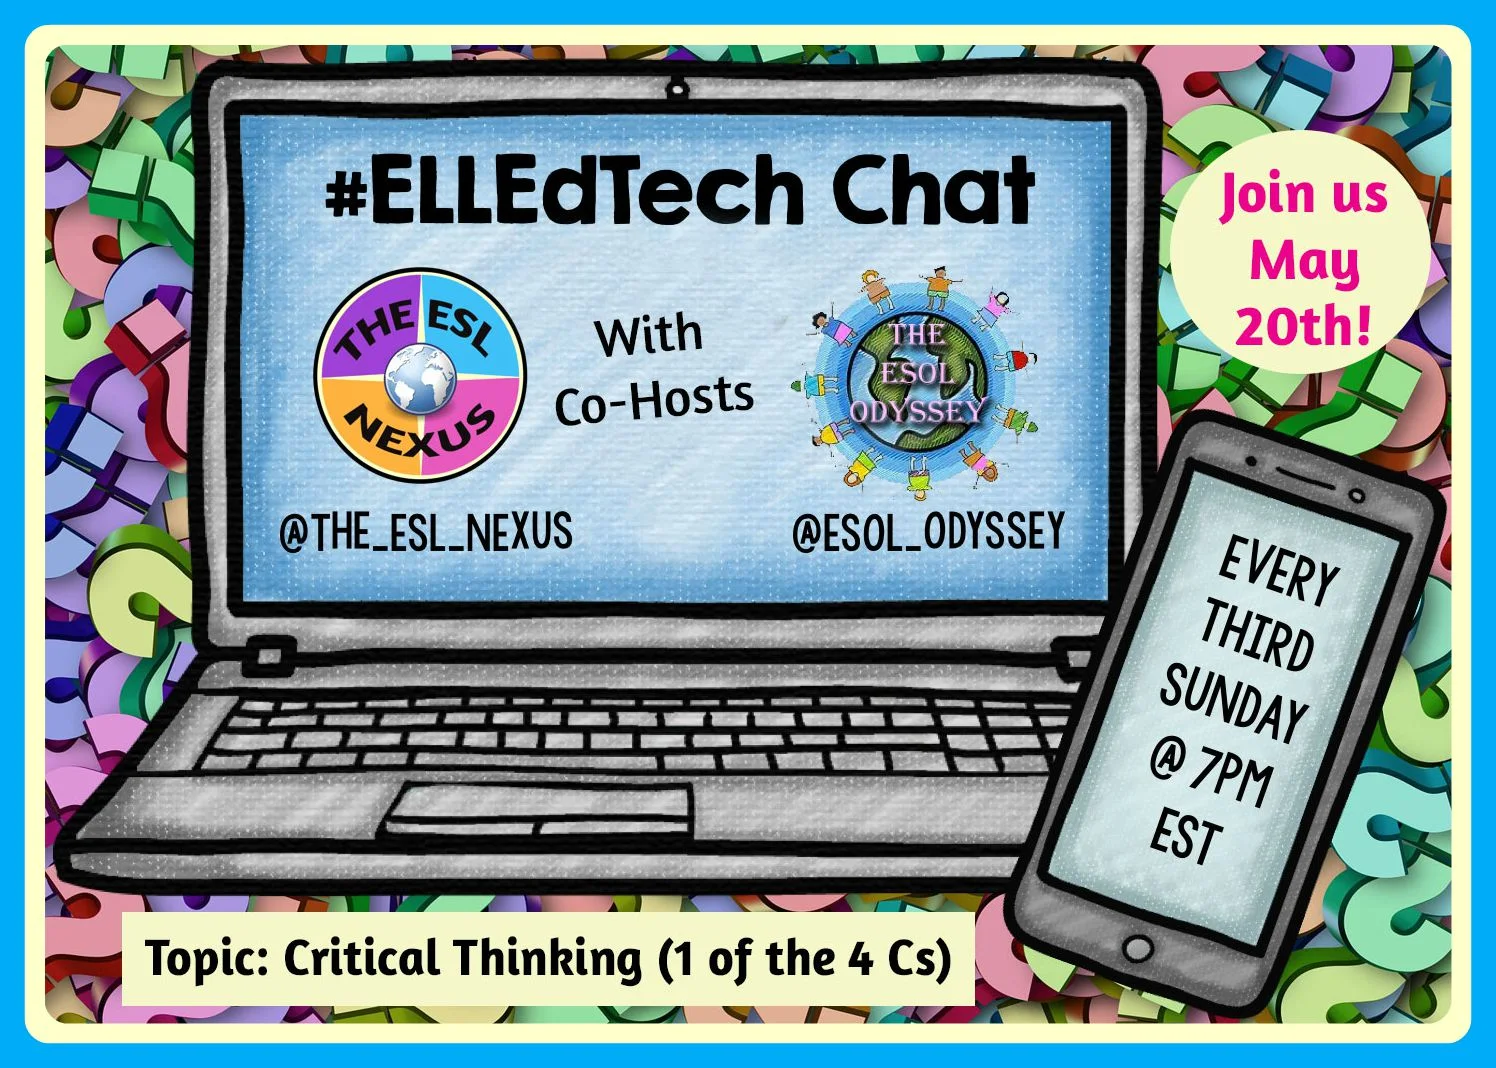 Come and discuss using tech tools to develop ELLs' critical thinking skills in the next #ELLEdTech Twitter chat on May 20, 2018 | The ESL Nexus